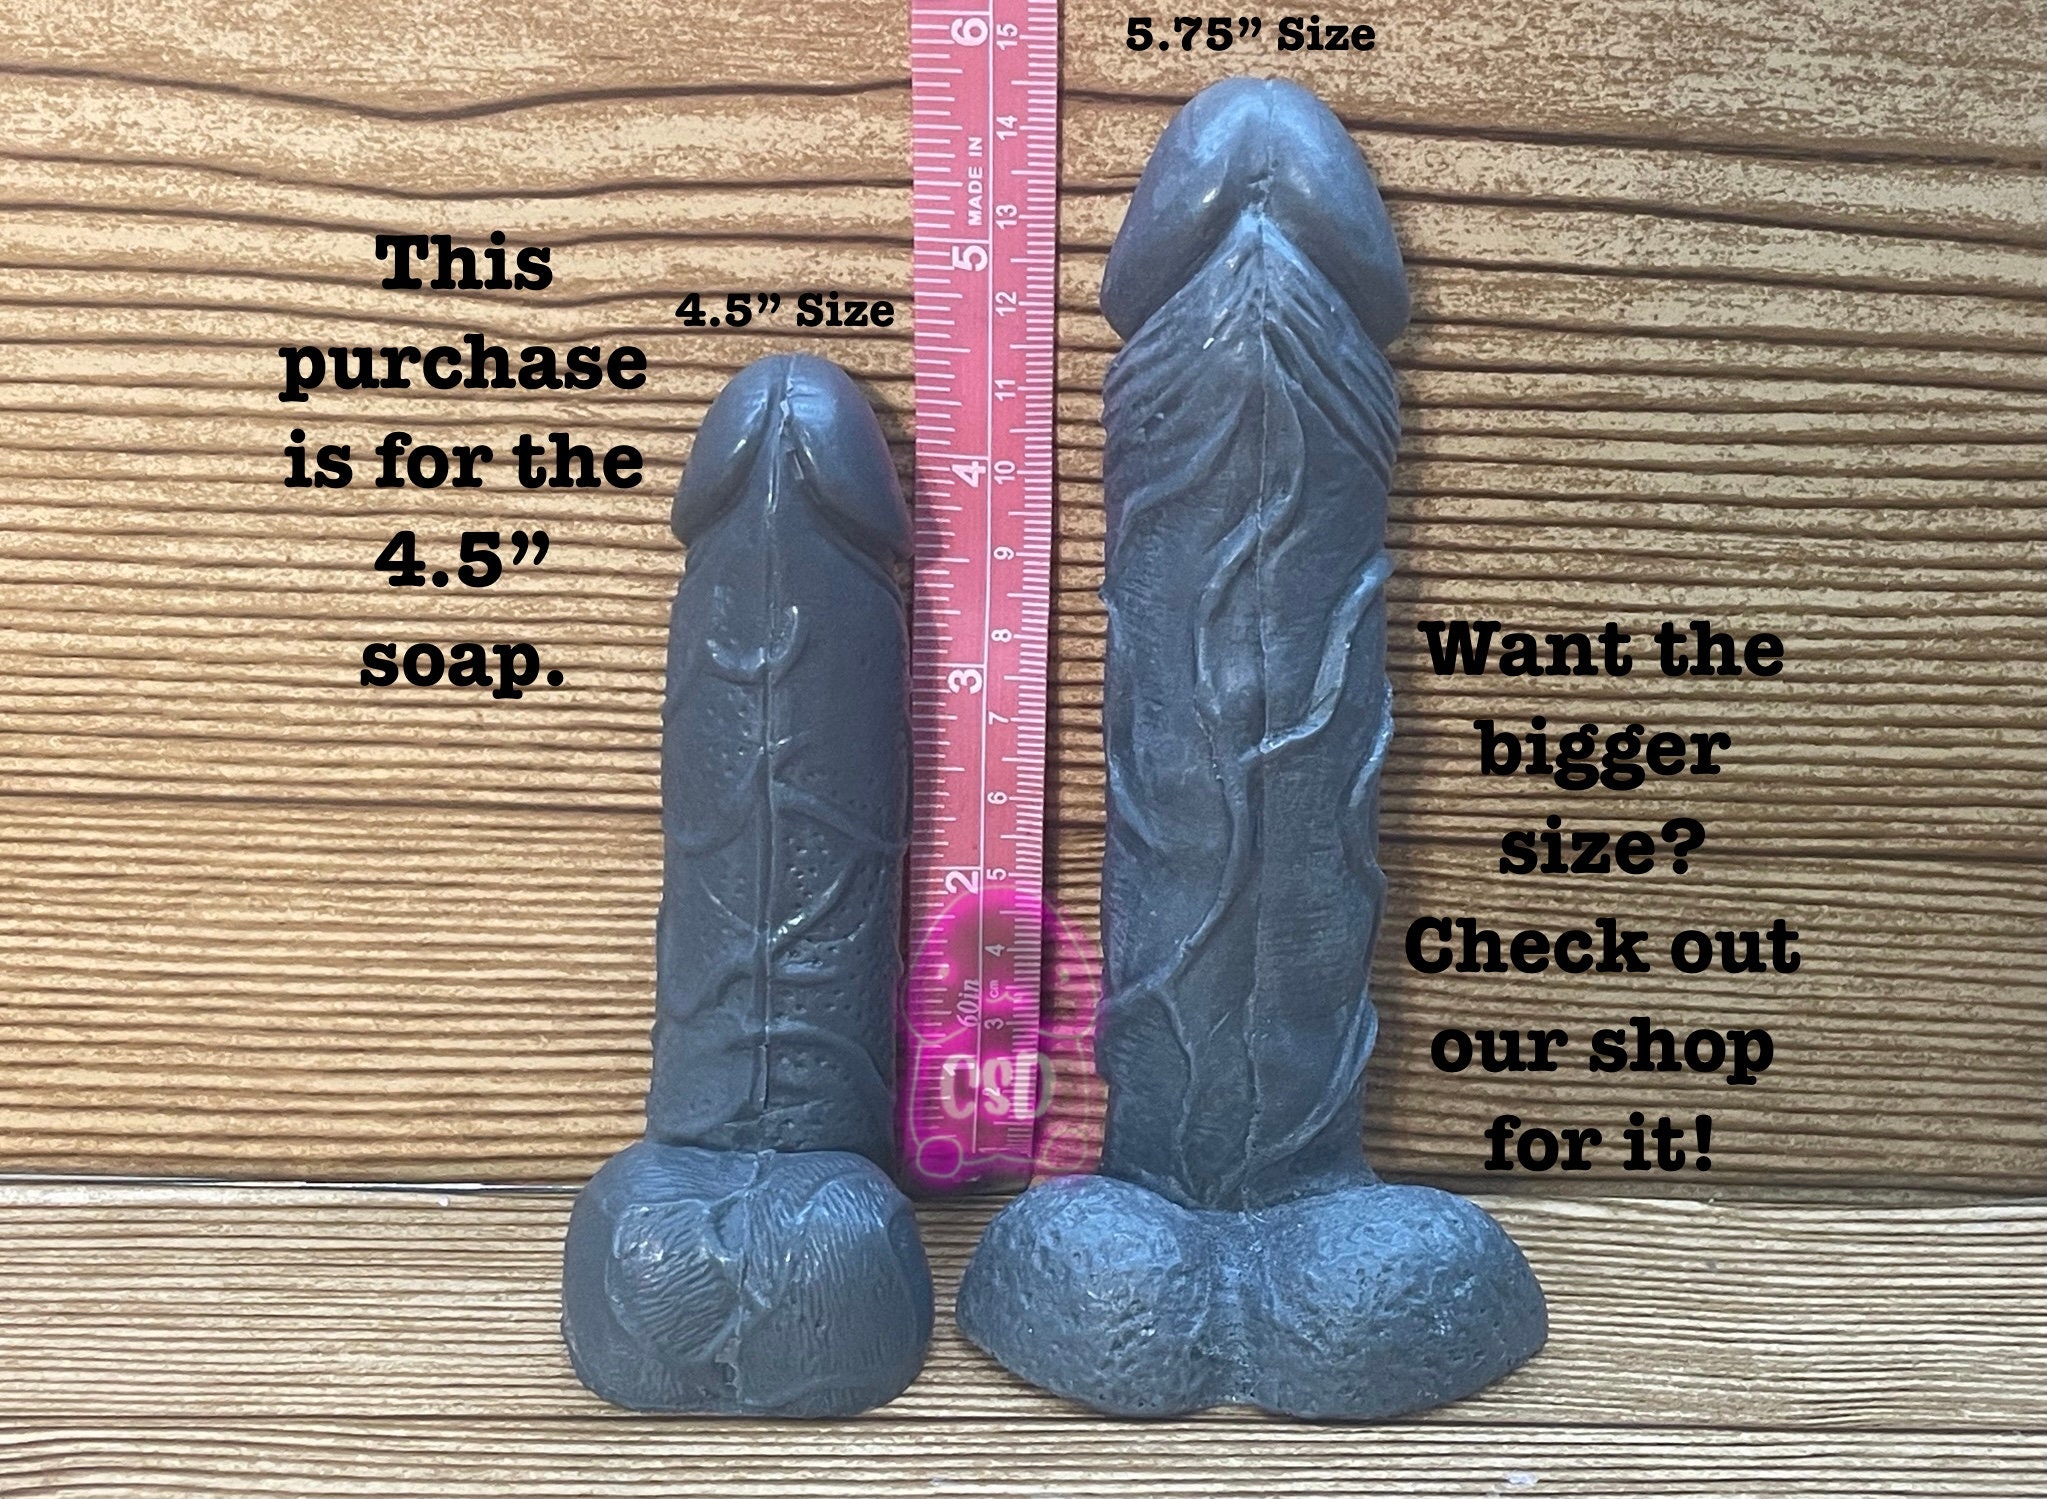 anastasya joseph share what does a five inch penis look like photos